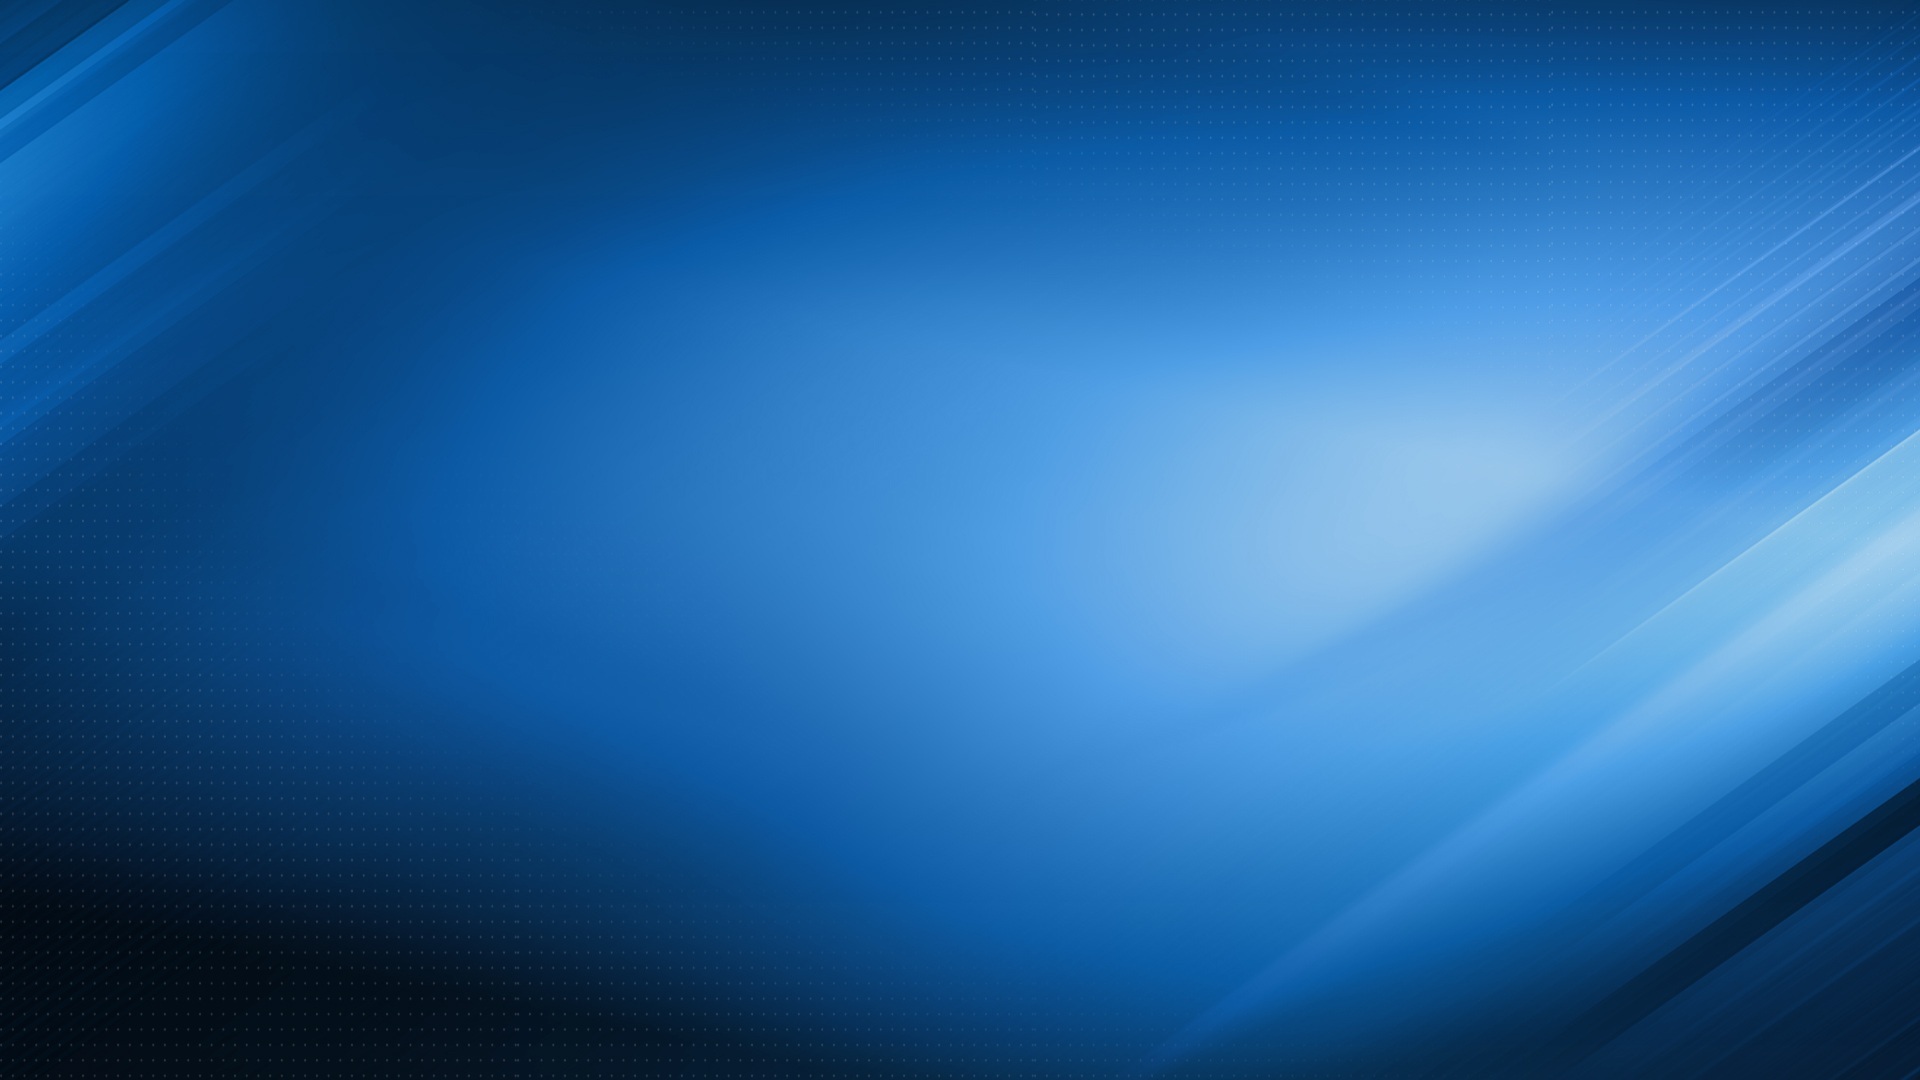 Blue Gradient Wallpaper And Image Pictures